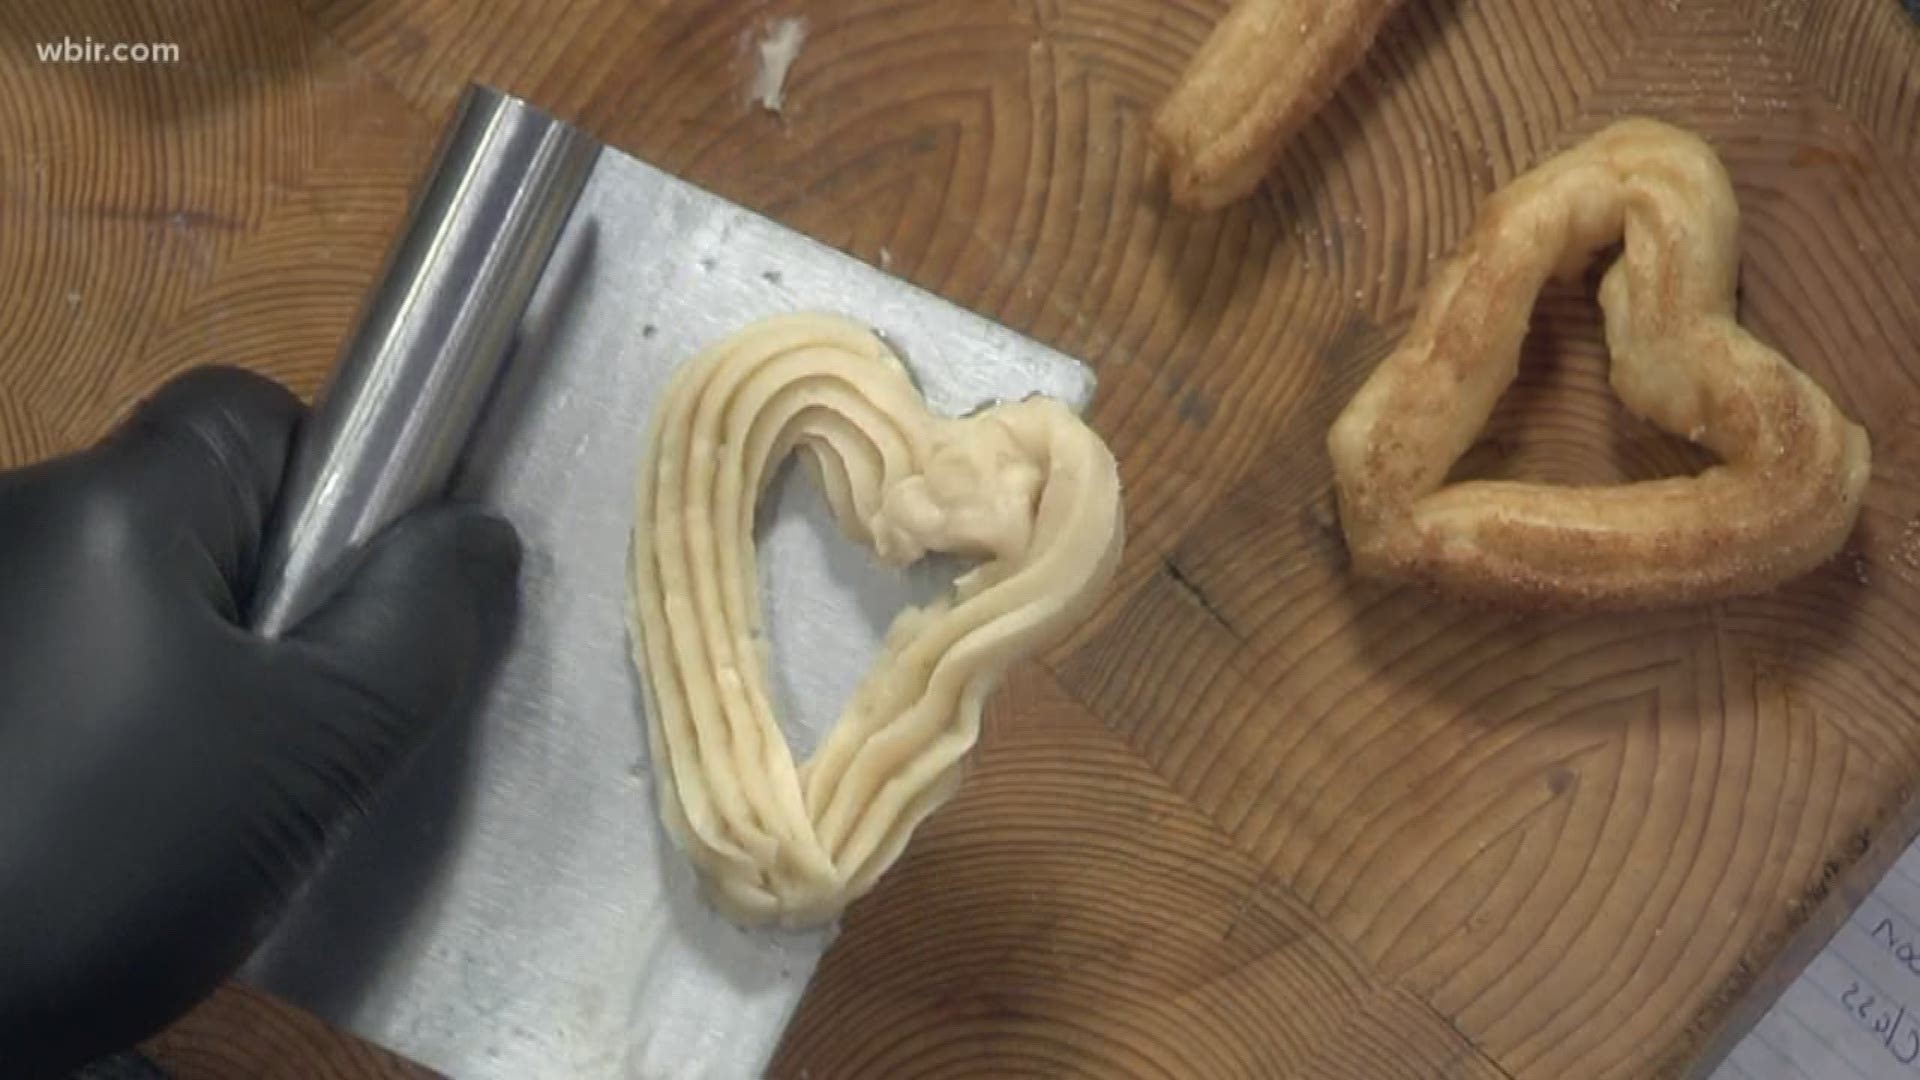 Chef John Alunni from the Cutting Edge Classroom is in the kitchen with us to make some Valentine's Day churros.